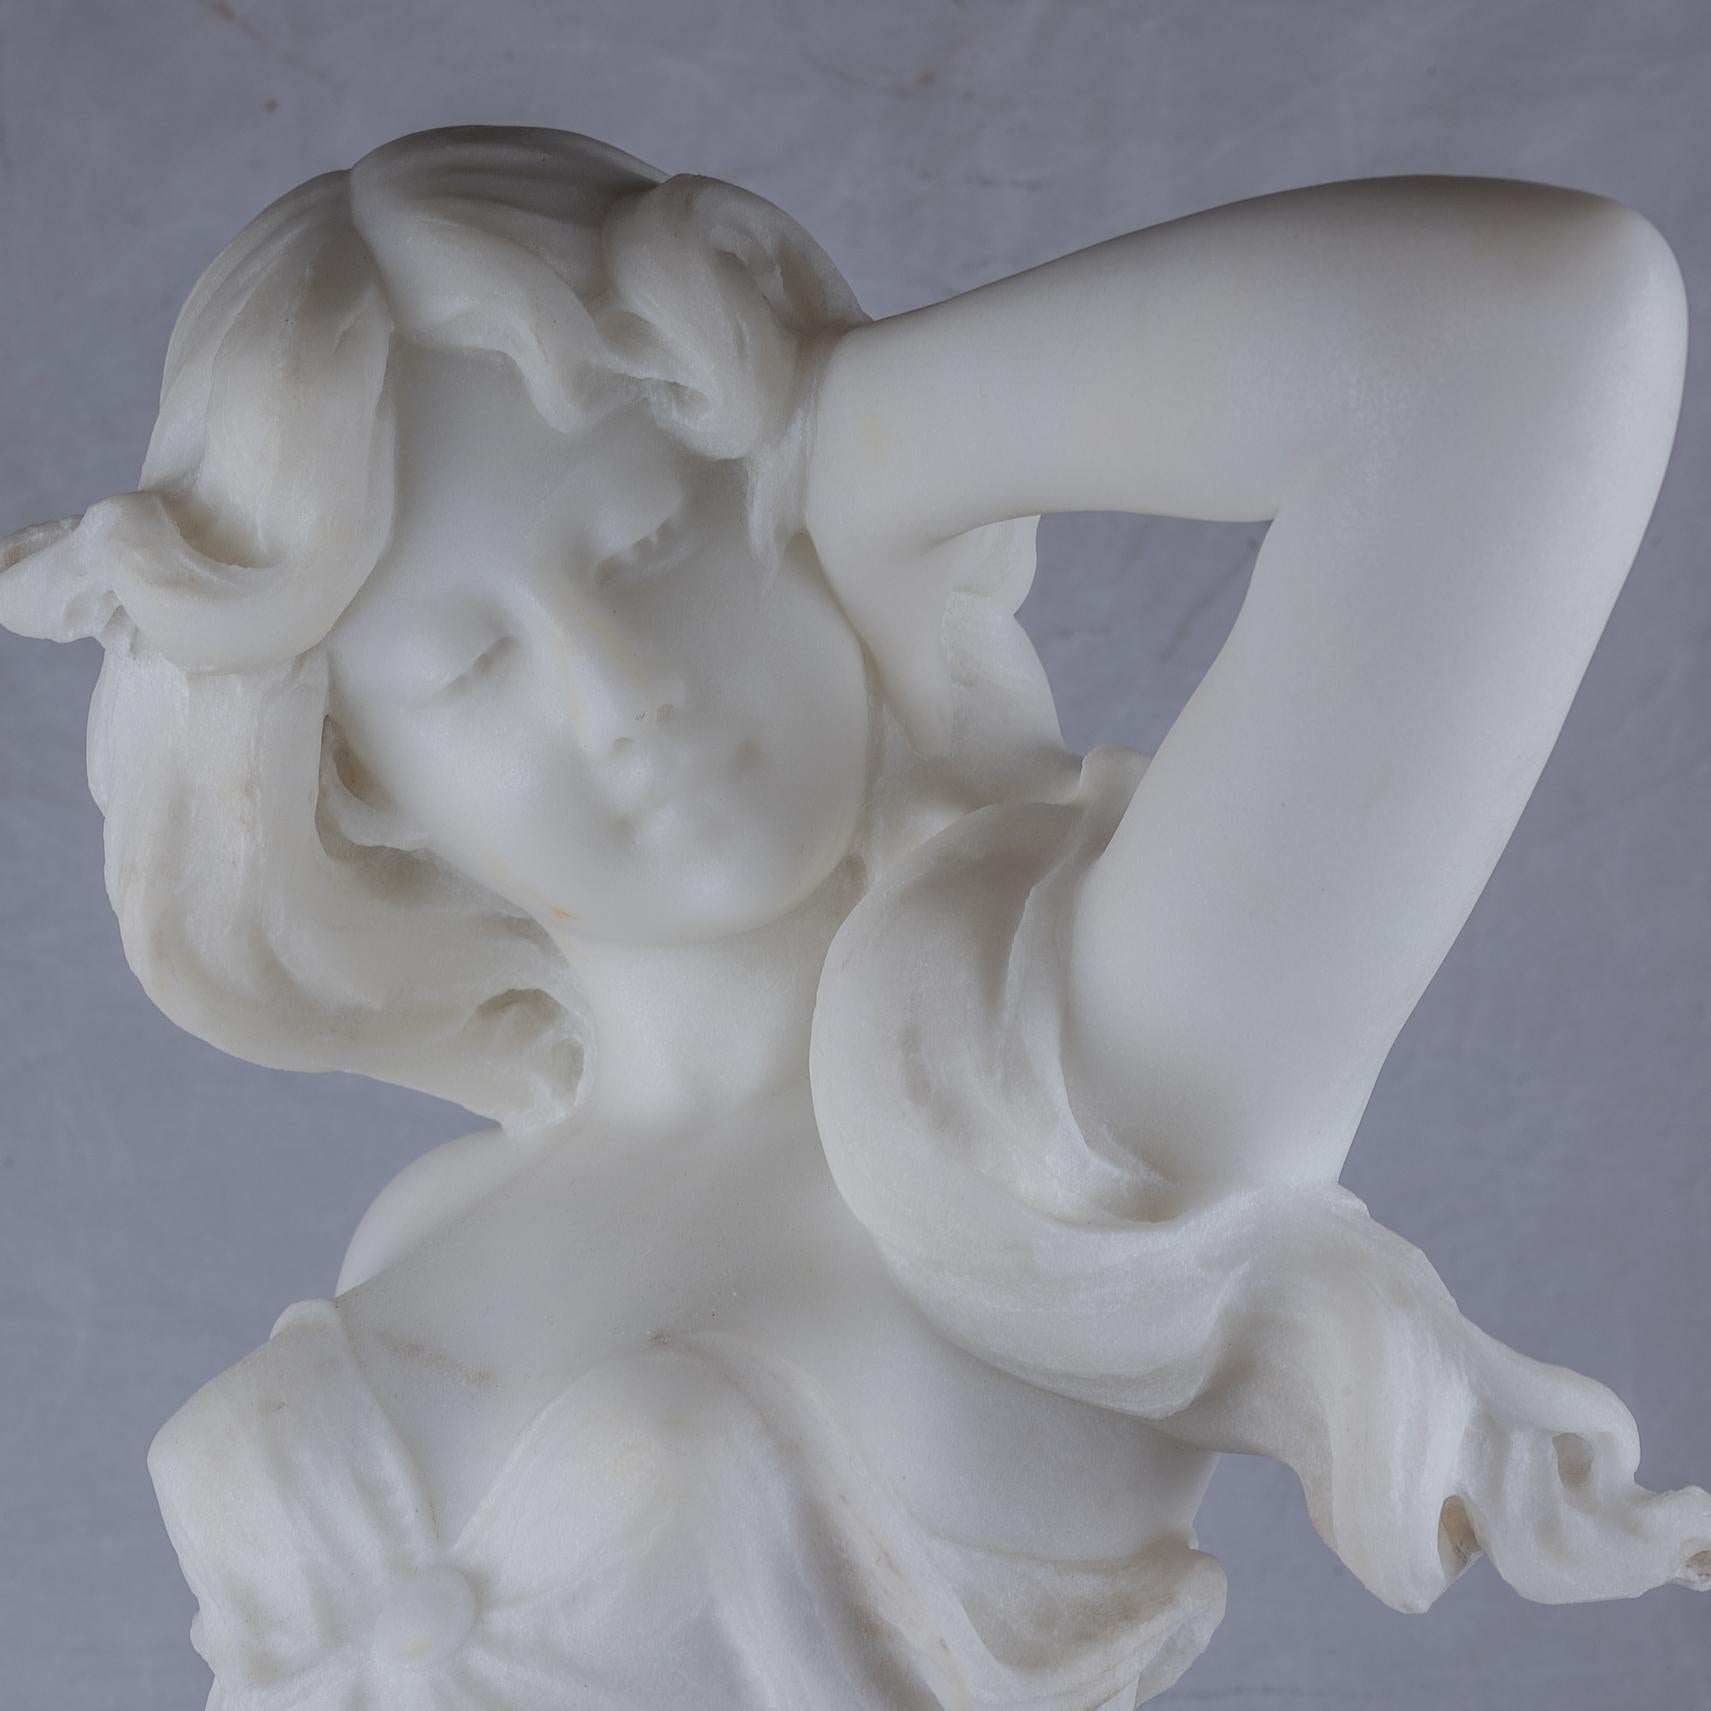 Carved Italian White Marble Sculpture of a Female Allegorical Figure by Batacchi